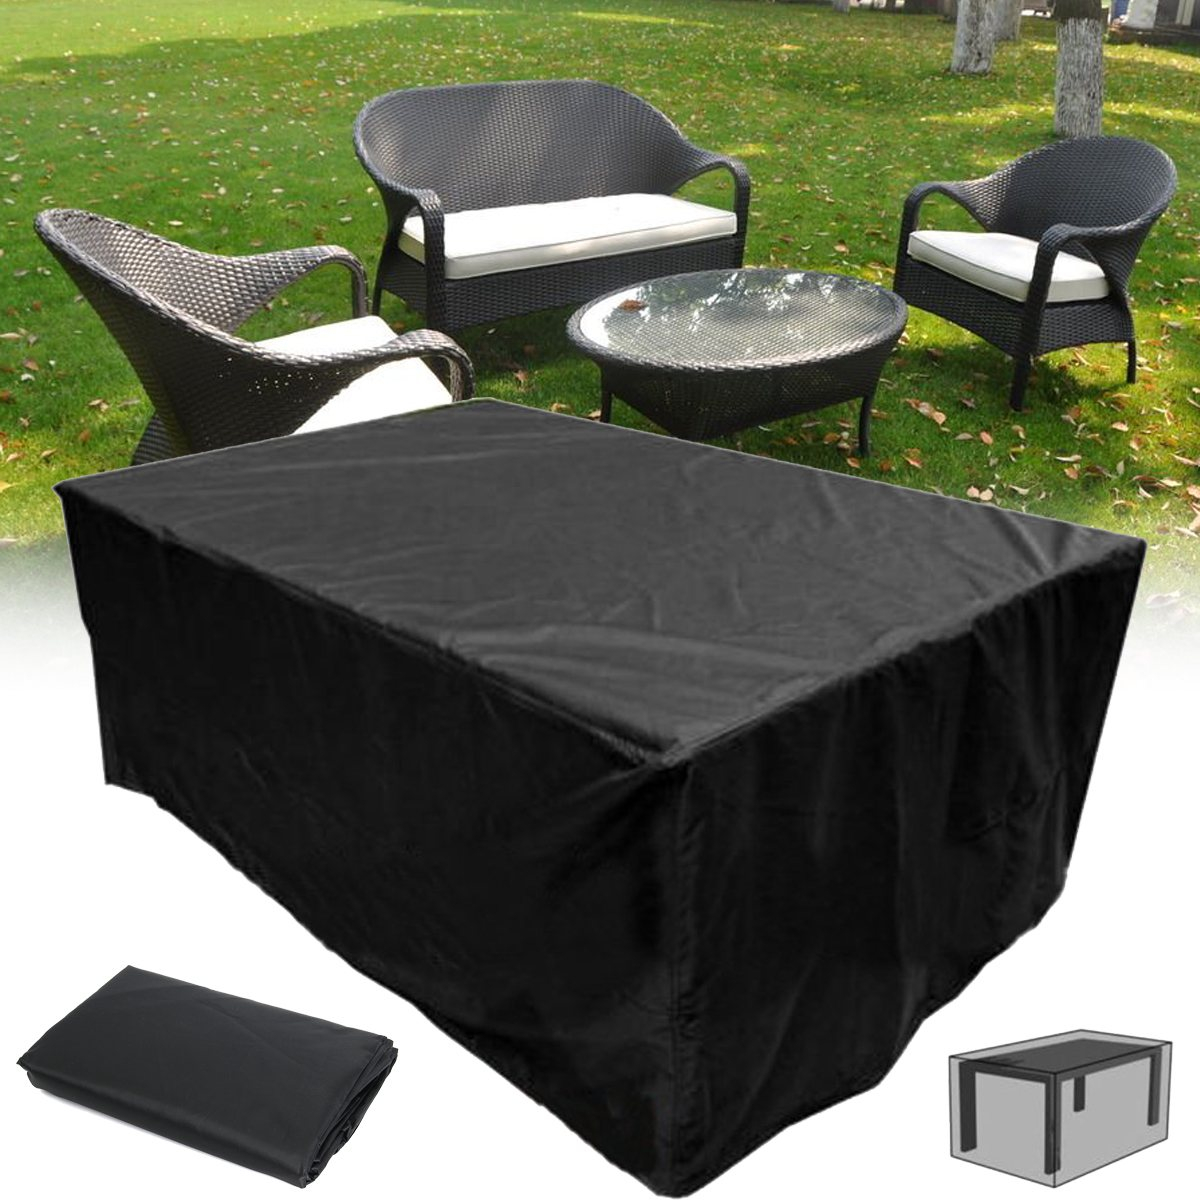 Us 1201 42 Offnew Black Outdoor Garden Patio Furniture Covers Shelter Sun Protection Cover Canopy Dustproof Cloth Table Protect Bag Textiles In within sizing 1200 X 1200